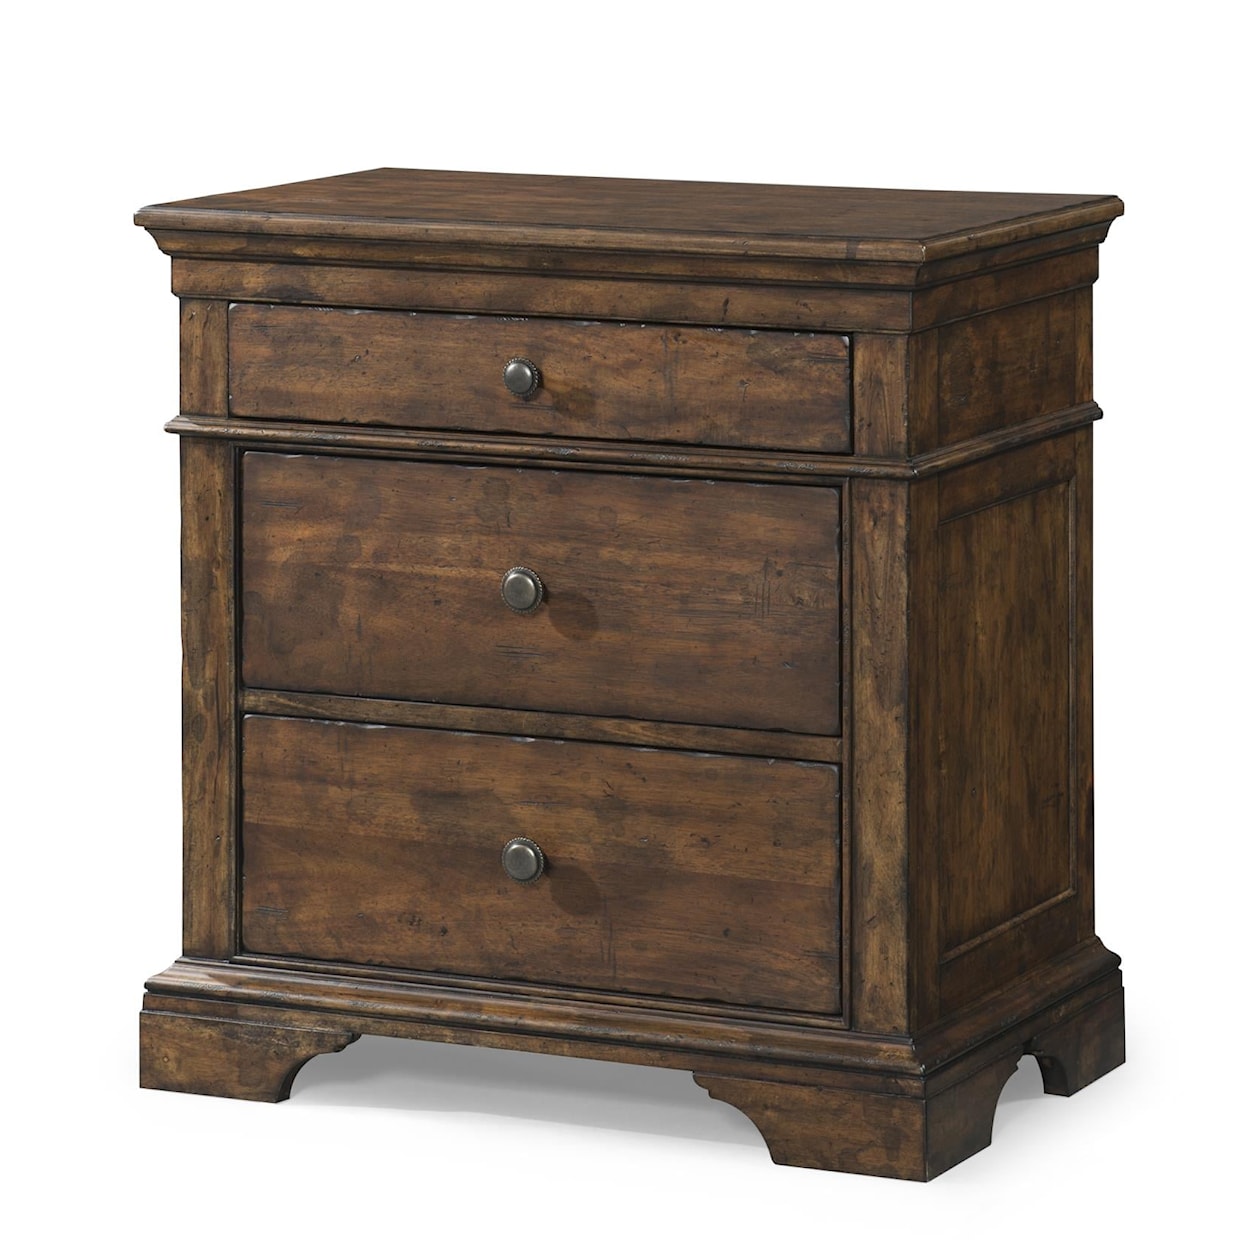 Trisha Yearwood Home Collection by Legacy Classic Trisha Yearwood Home Nightstand